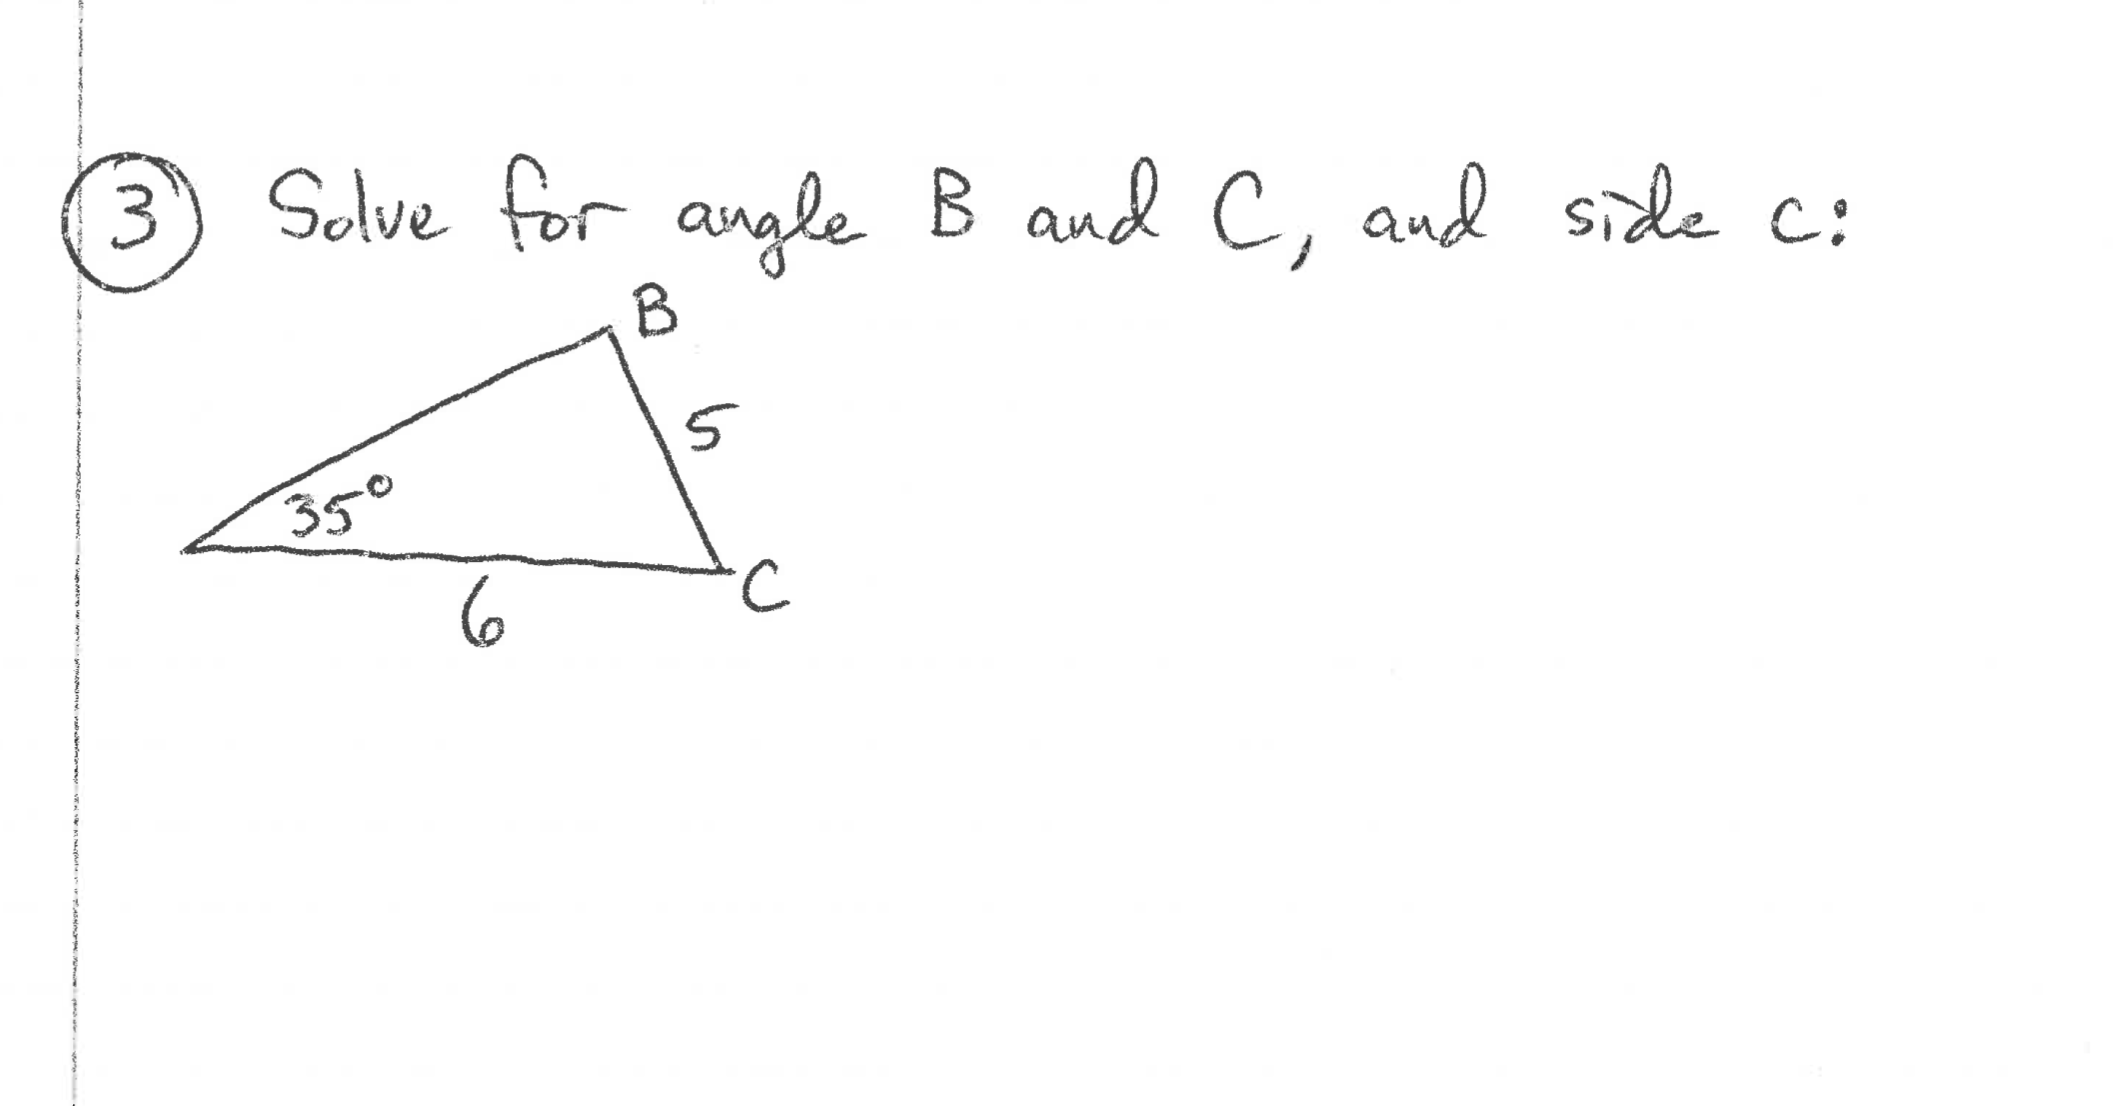 3
Solve for angle B and C, and side c:
B
350
6
